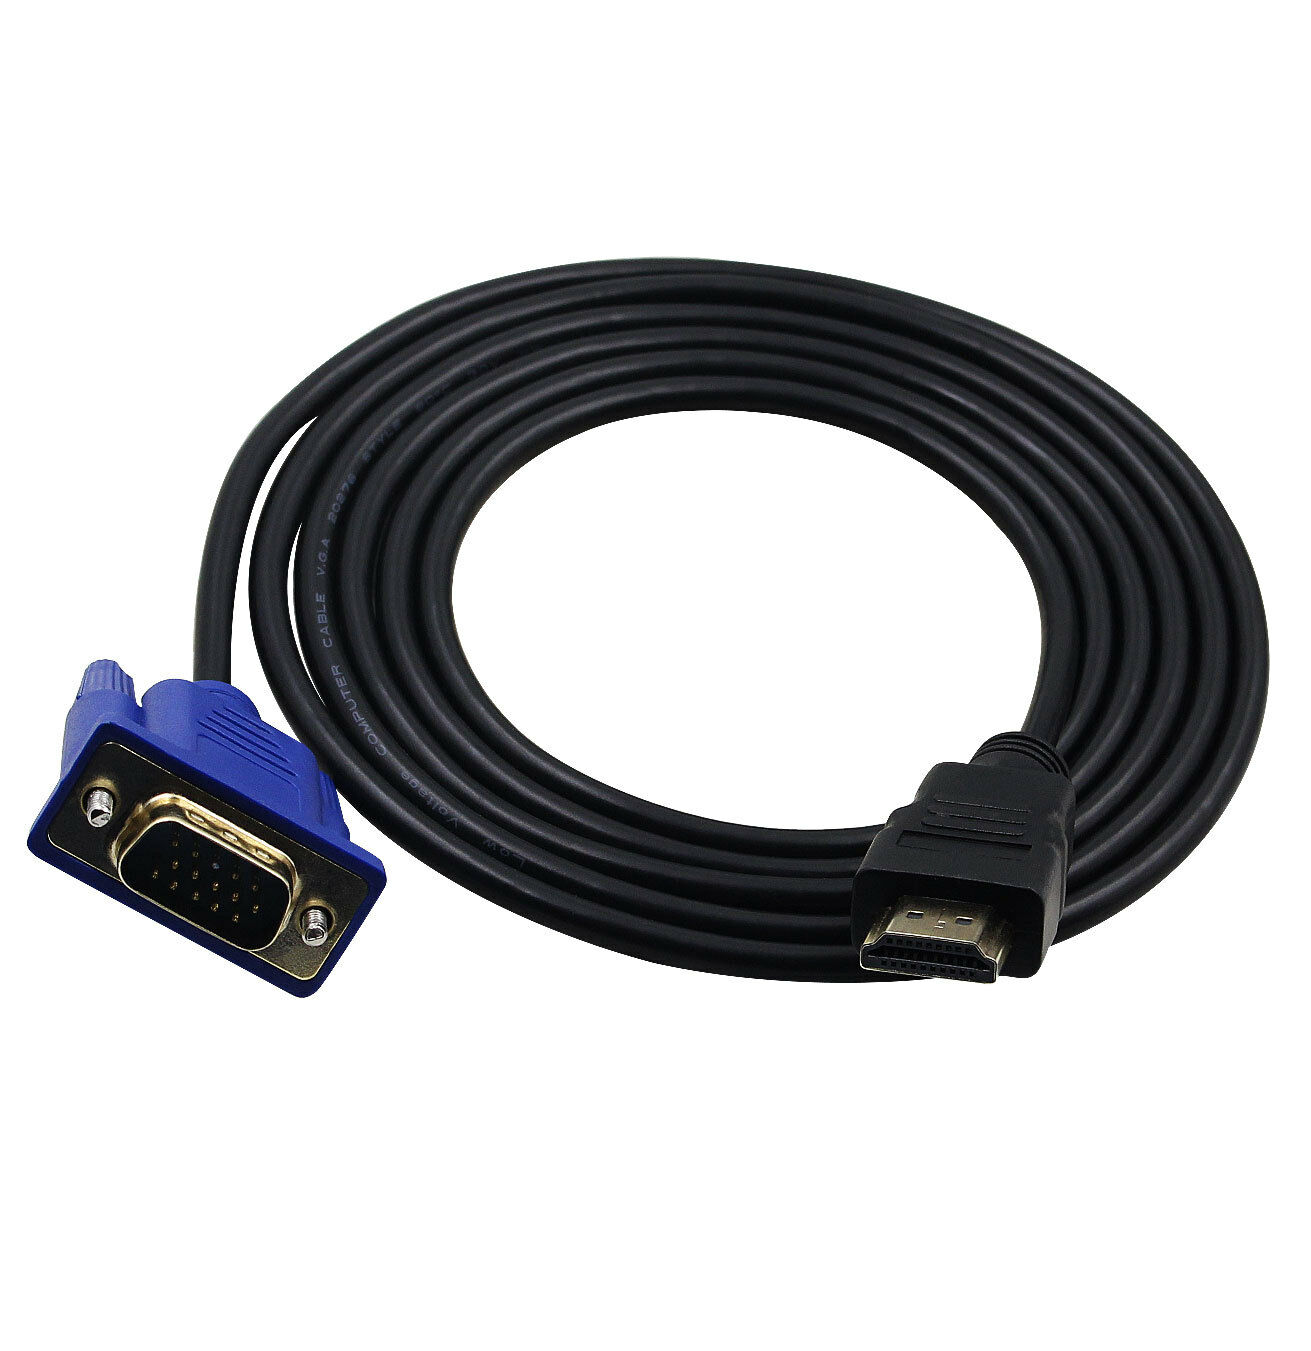 ASUS VS278Q-P HDMI to VGA Adapter connector cable